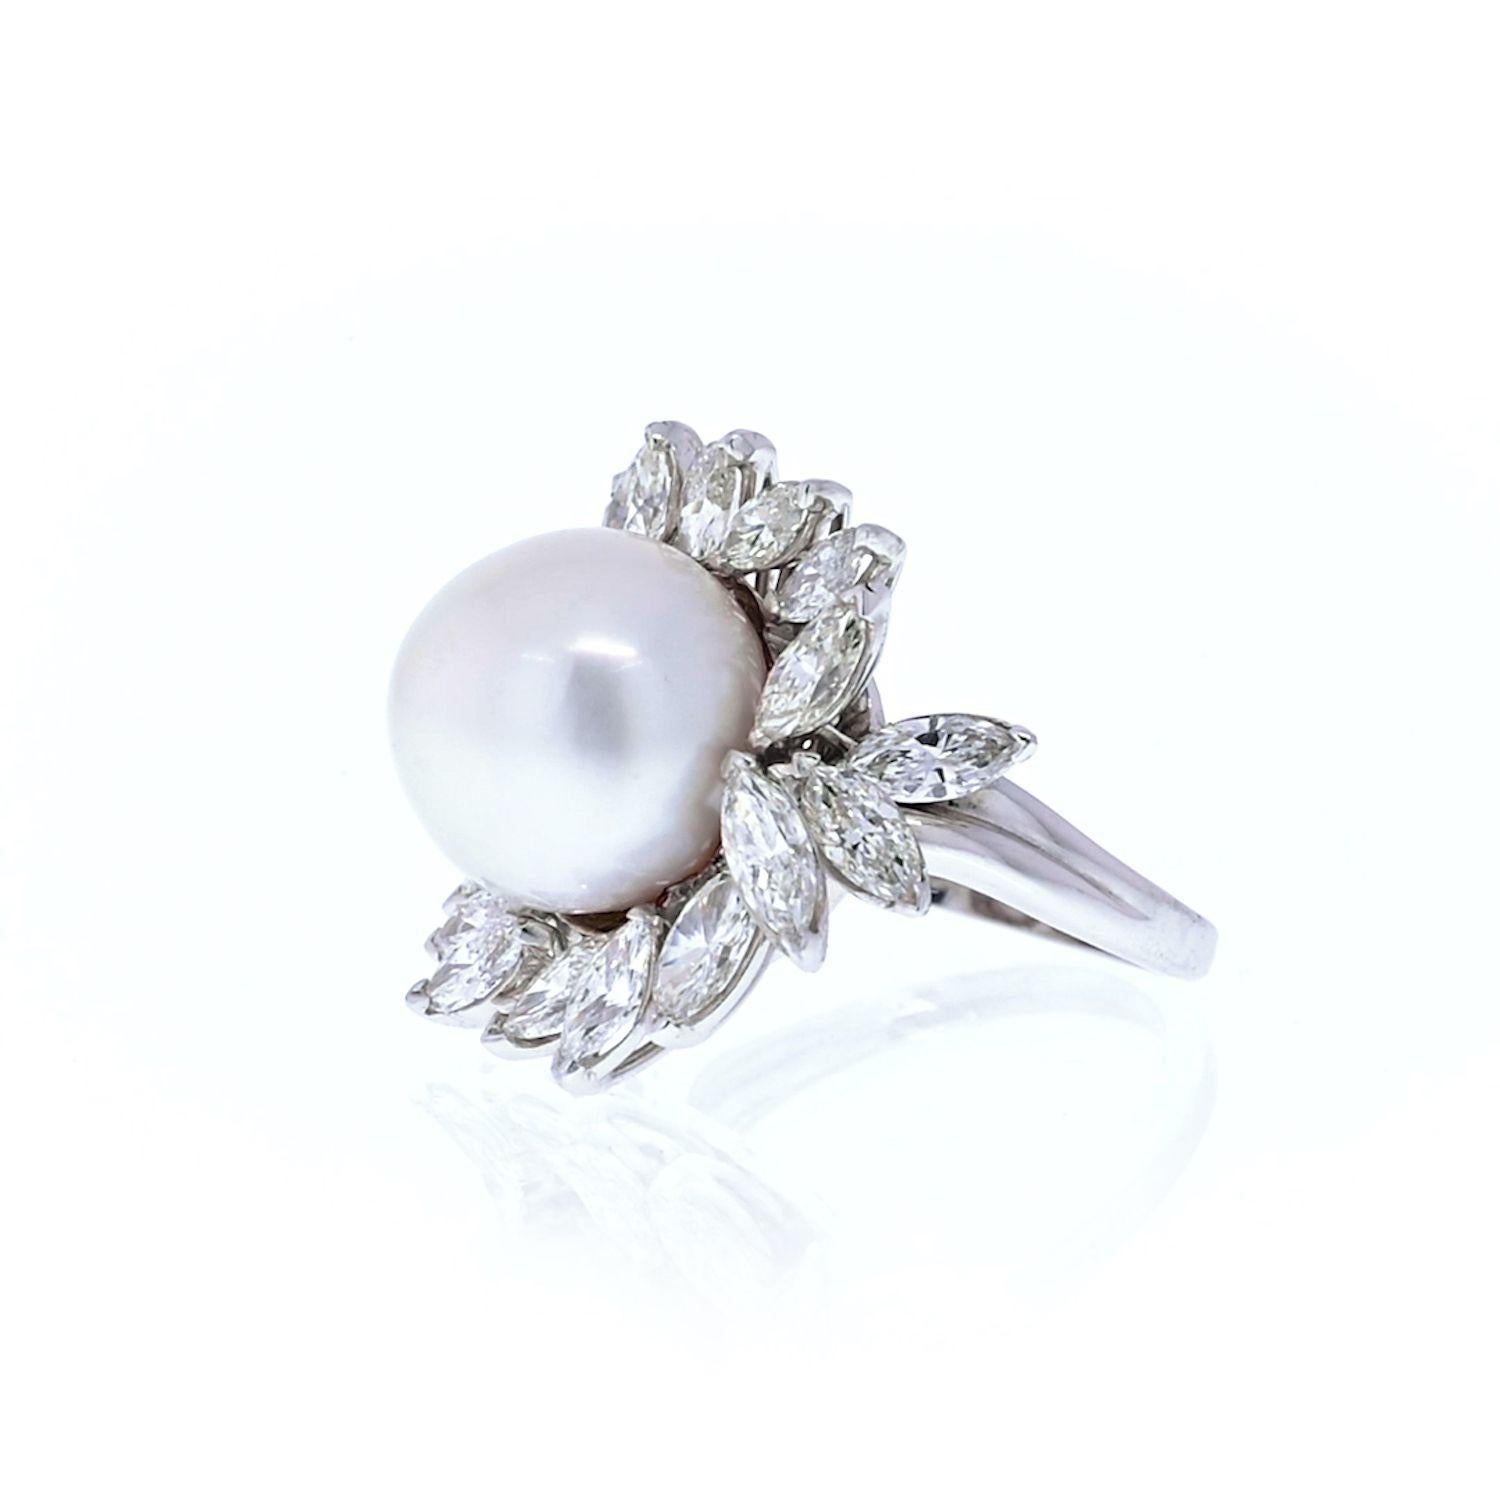 This one of a kind Platinum Pearl & Marquise Diamond Ring weighs approximately 17 grams and showcases a fabulous 13 mm south sea pearl in the center, adorned with 3.95 ctw of dazzling VS clarity marquise cut diamonds, each masterfully prong set in a